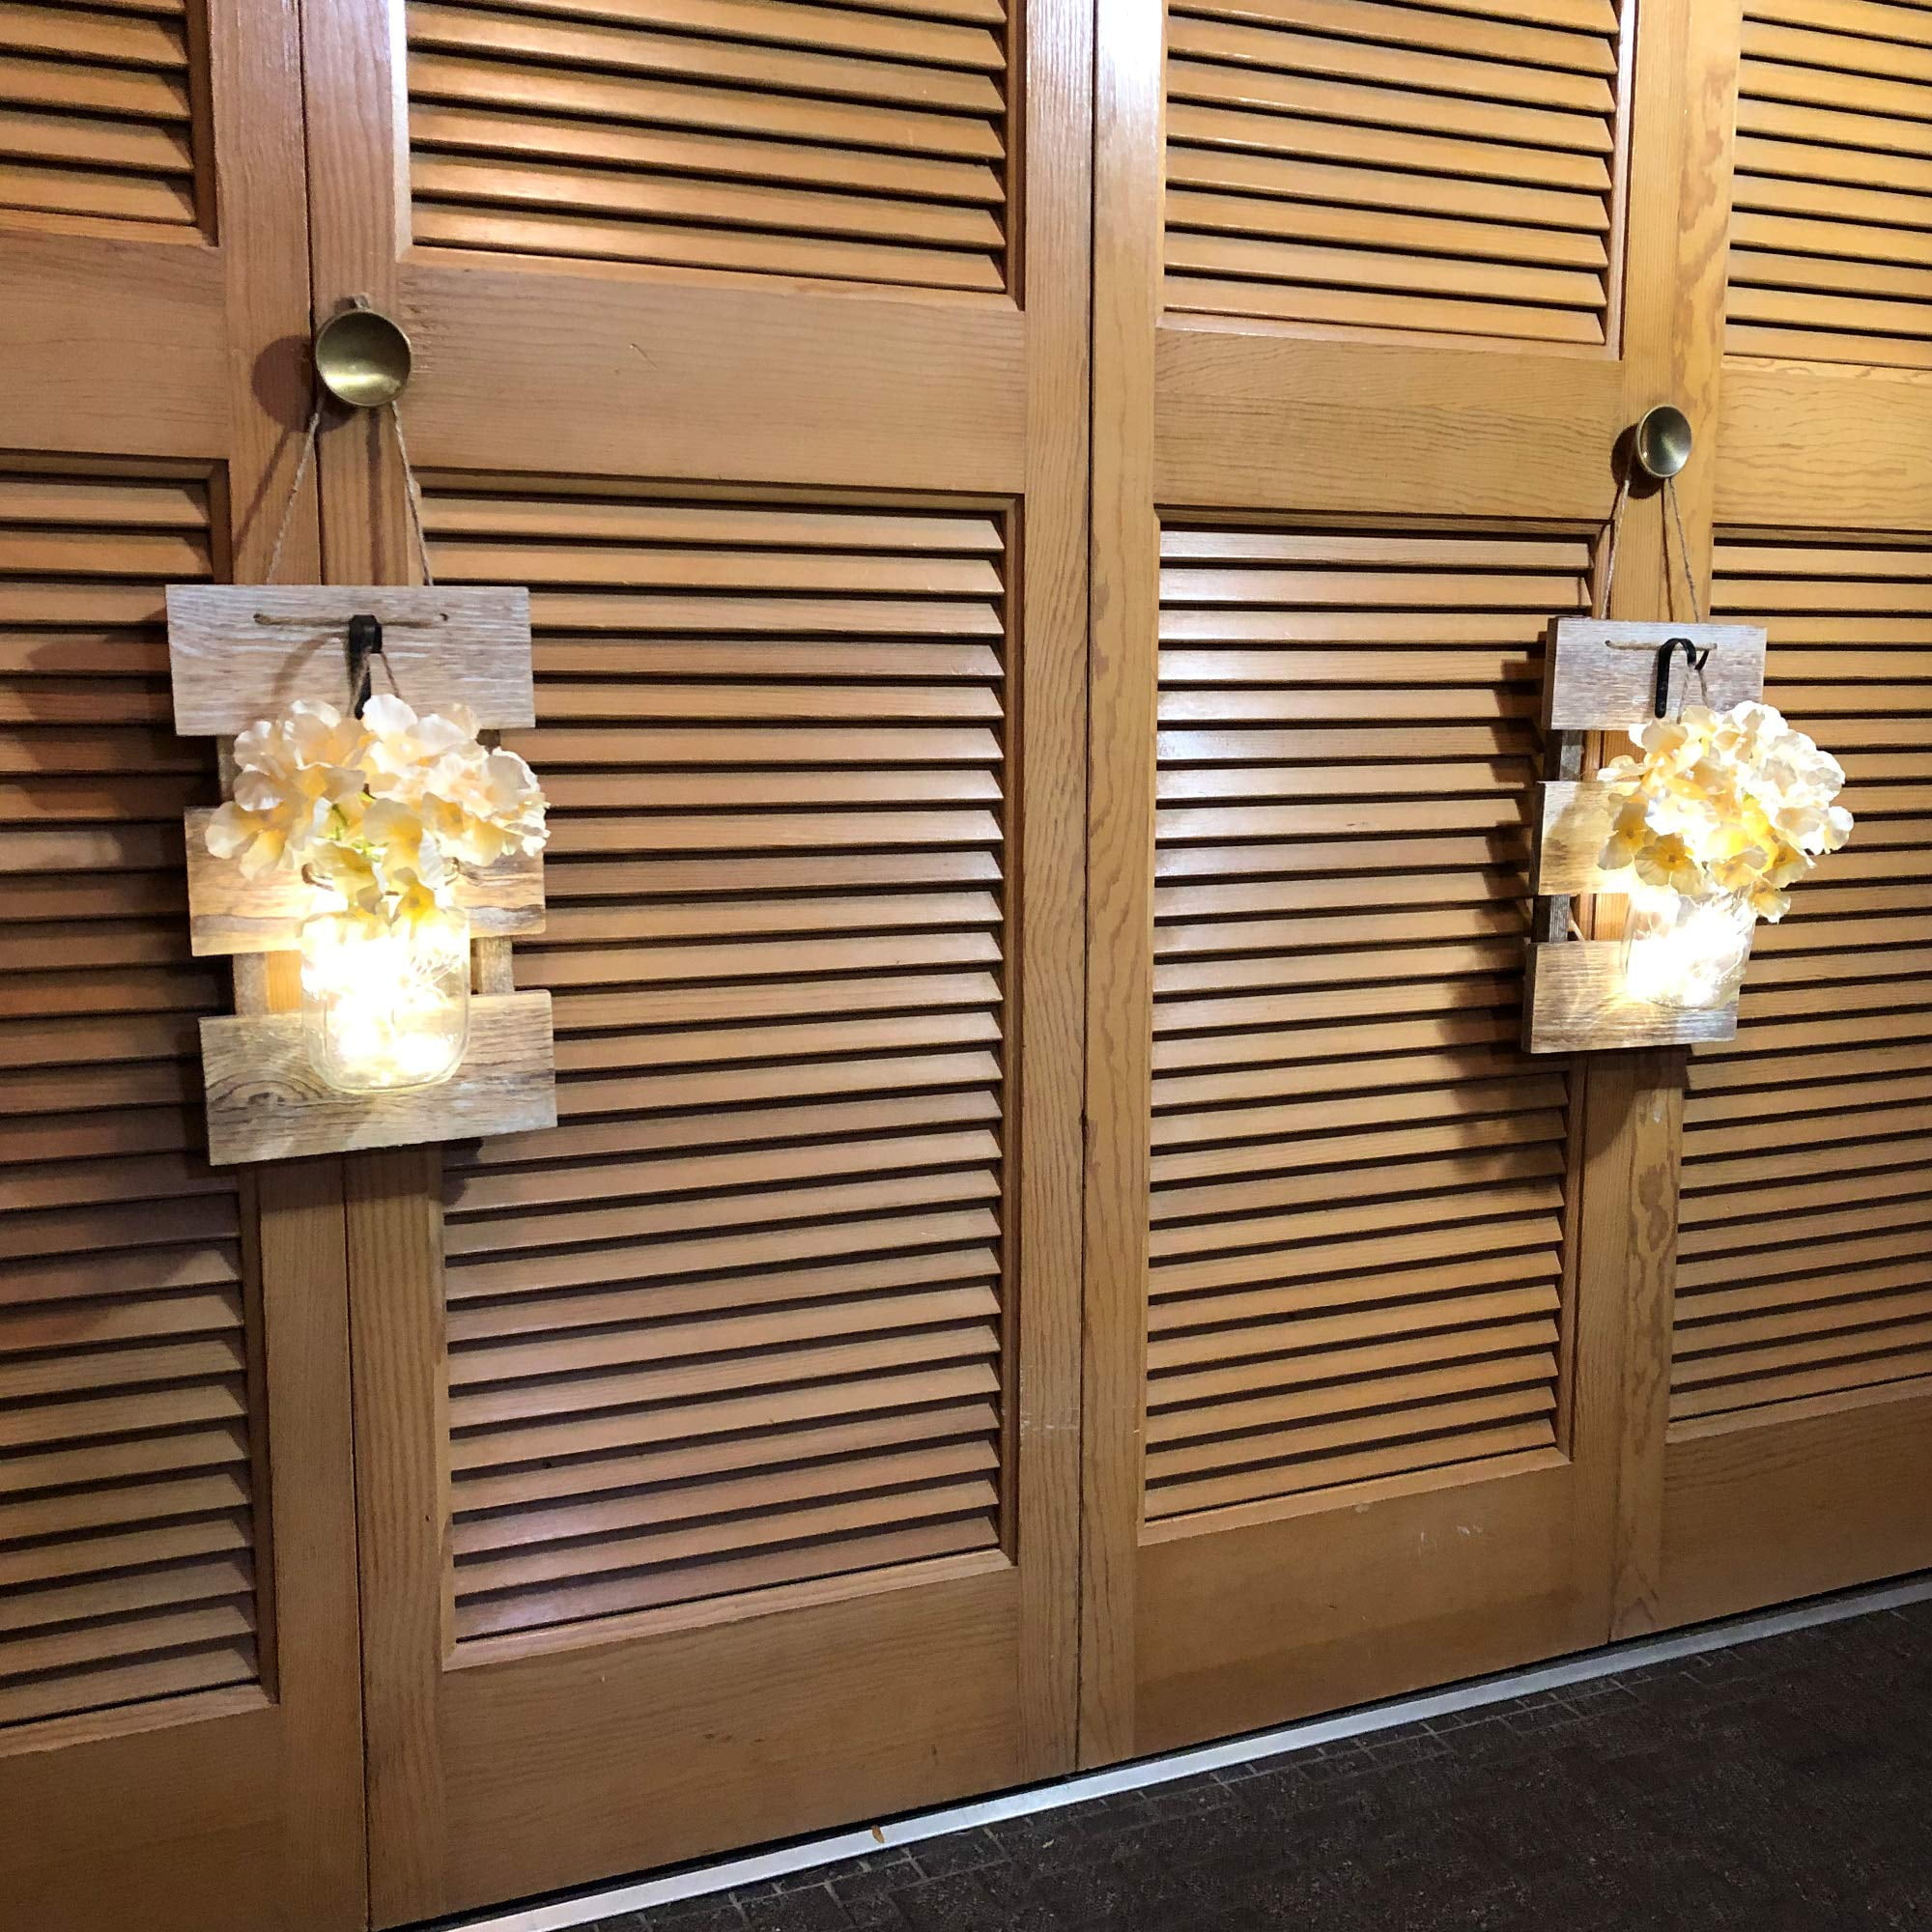 LED Fairy Lights with Automatic On and Off Timer Vintage Wall Hanging Decor Home Decorative Lighting Besuerte Mason Jar Wall Sconces Rustic Brown Set